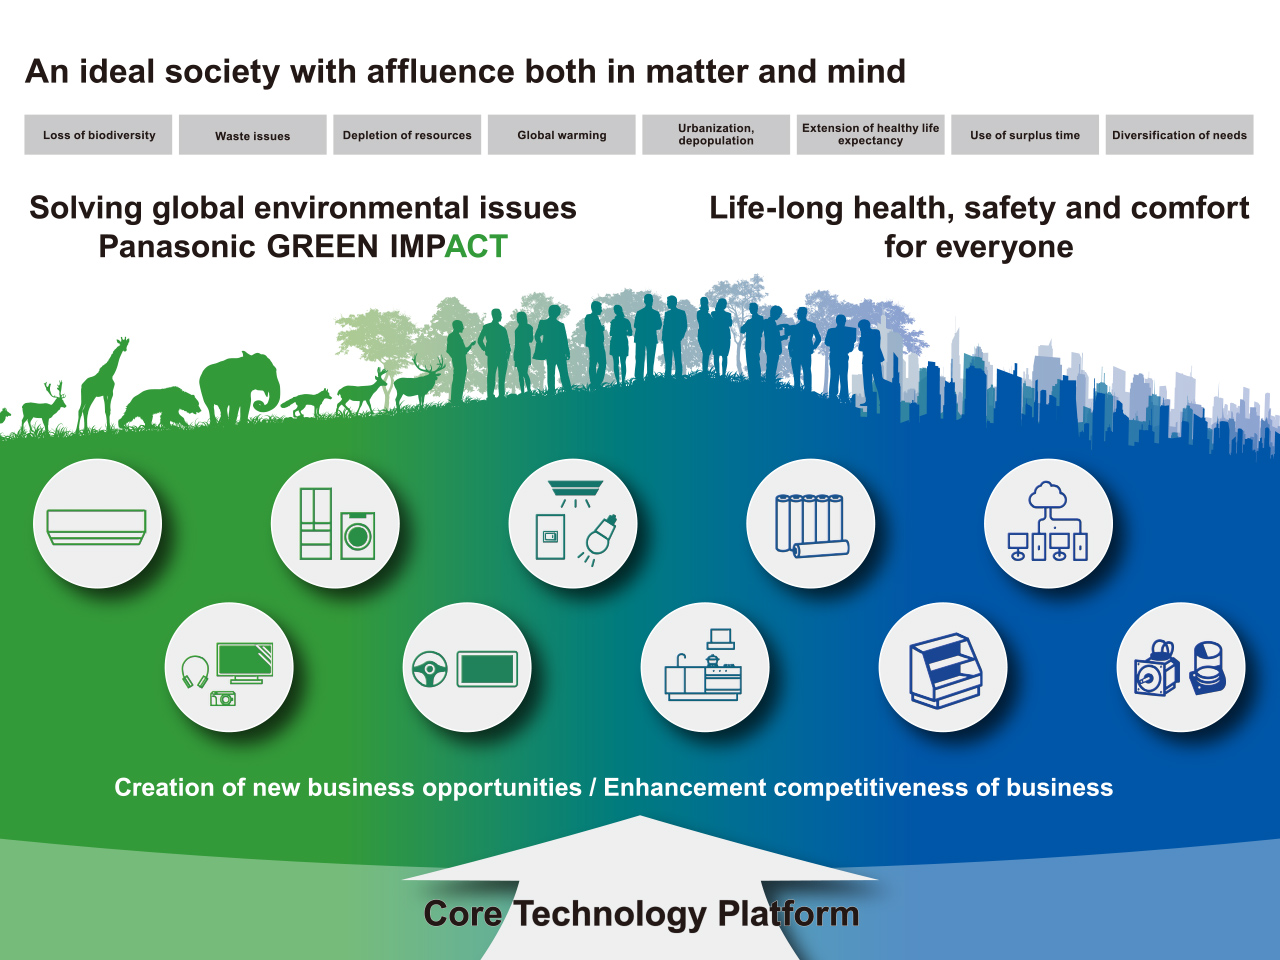 Diagram showing the direction of research and development aimed at solving global environmental problems and contributing to the lifelong health, safety, and comfort of each individual by the Panasonic Group.